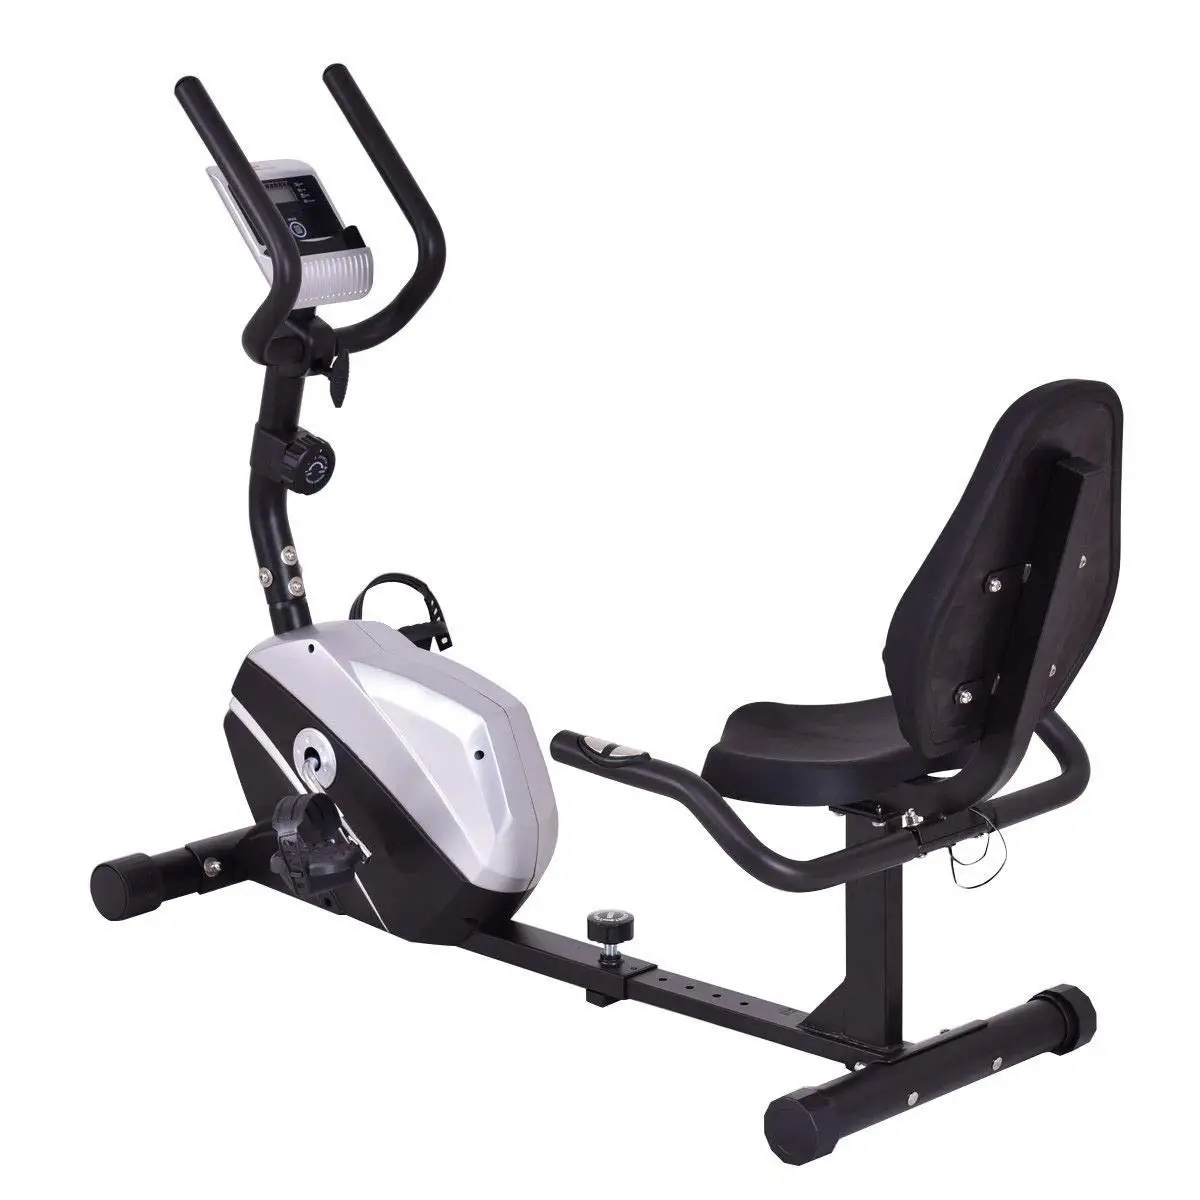 Cheap Freemotion 335r Recumbent Exercise Bike Find Freemotion 335r Recumbent Exercise Bike Deals On Line At Alibaba Com At freemotion we don't call ourselves innovative, we live innovation each and the most interactive workout experience on the market, the freemotion coachbike™ transports cyclists to breathtaking locations around the world. alibaba com